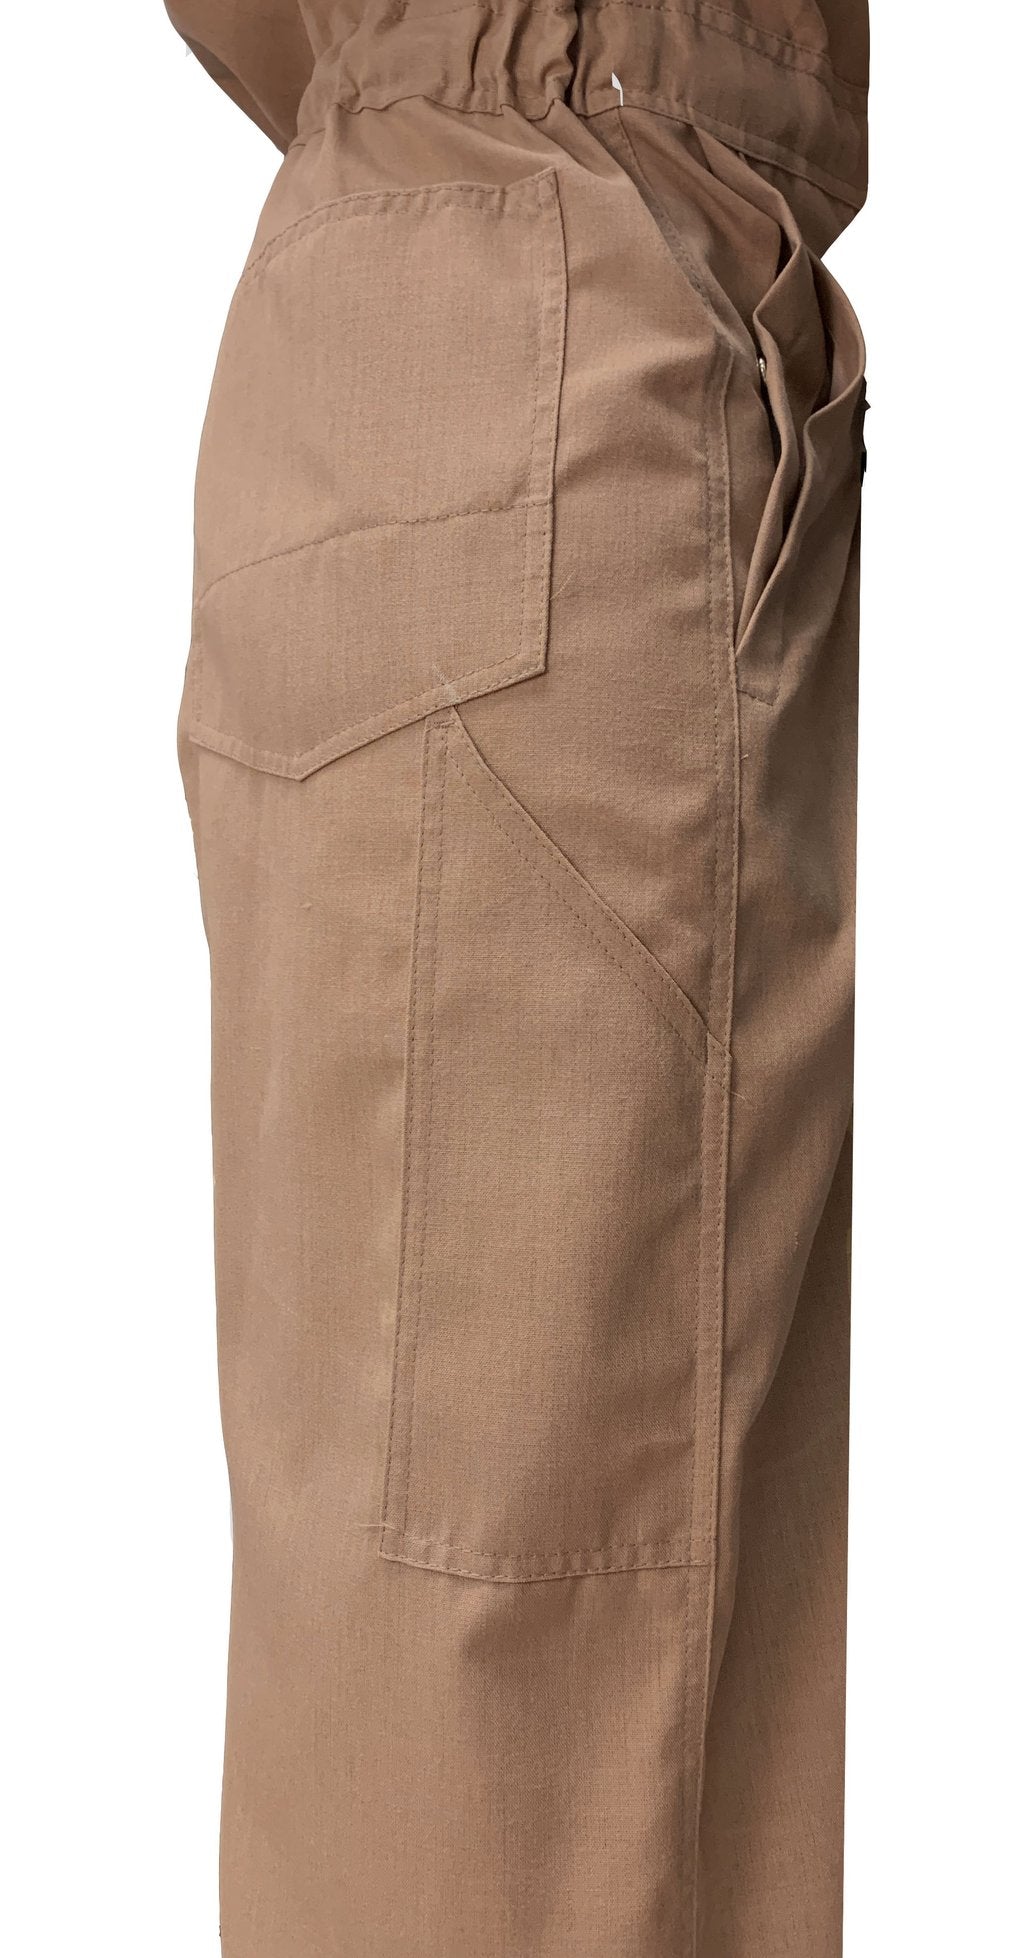 FlameRwear, FR Coverall Deluxe, fwCT1-6, Tecasafe One 5.7 oz, Cat2, Khaki